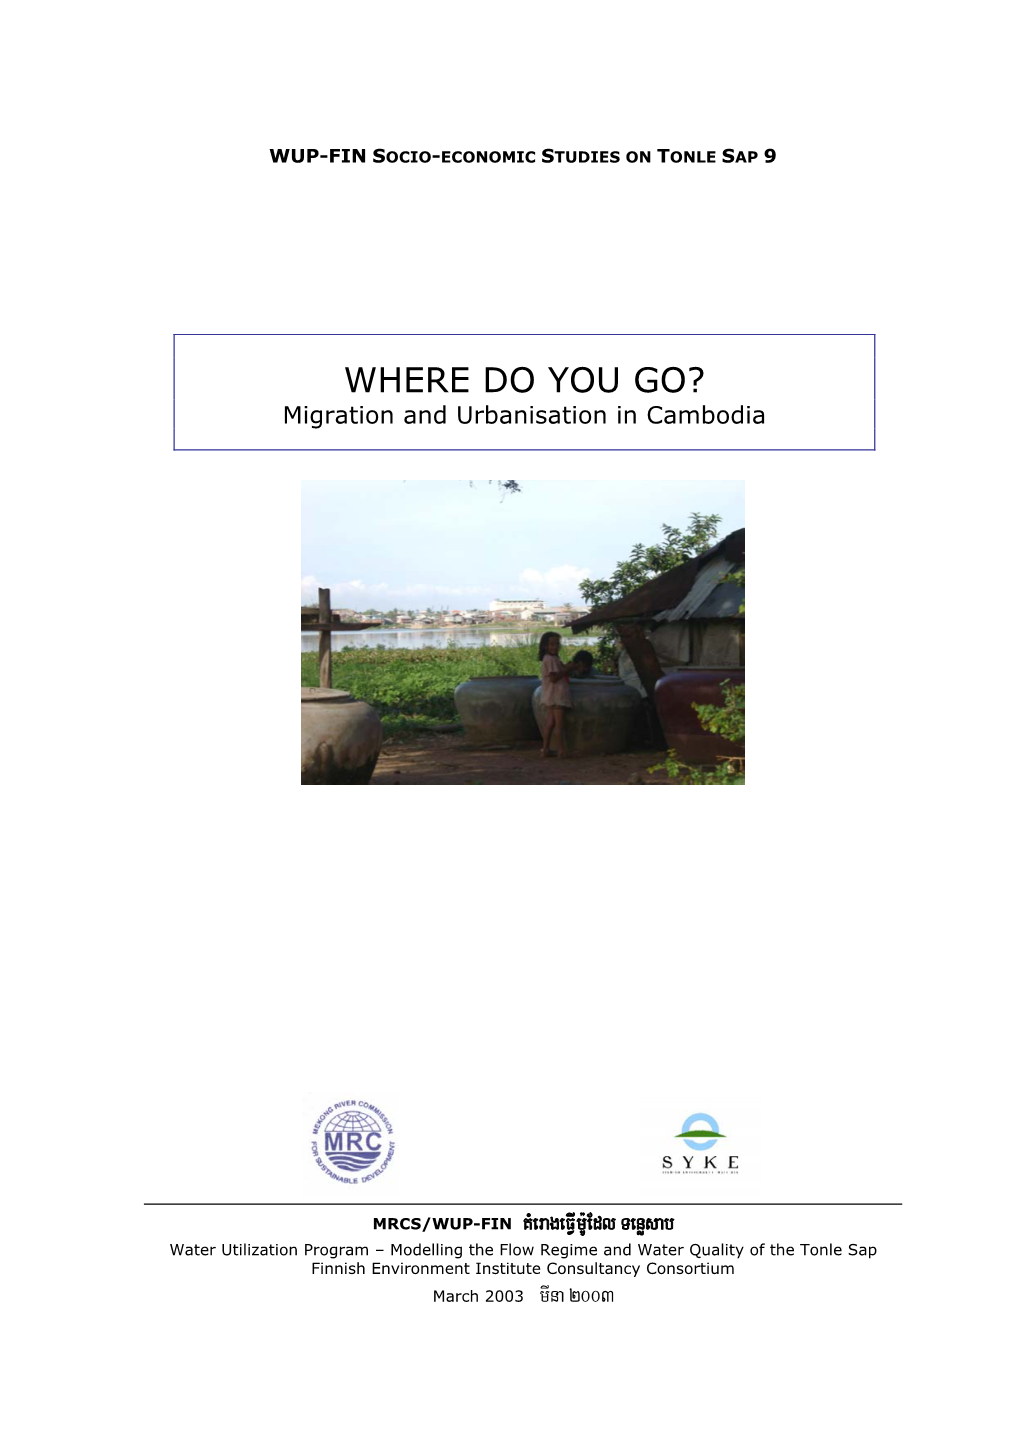 WHERE DO YOU GO? Migration and Urbanisation in Cambodia